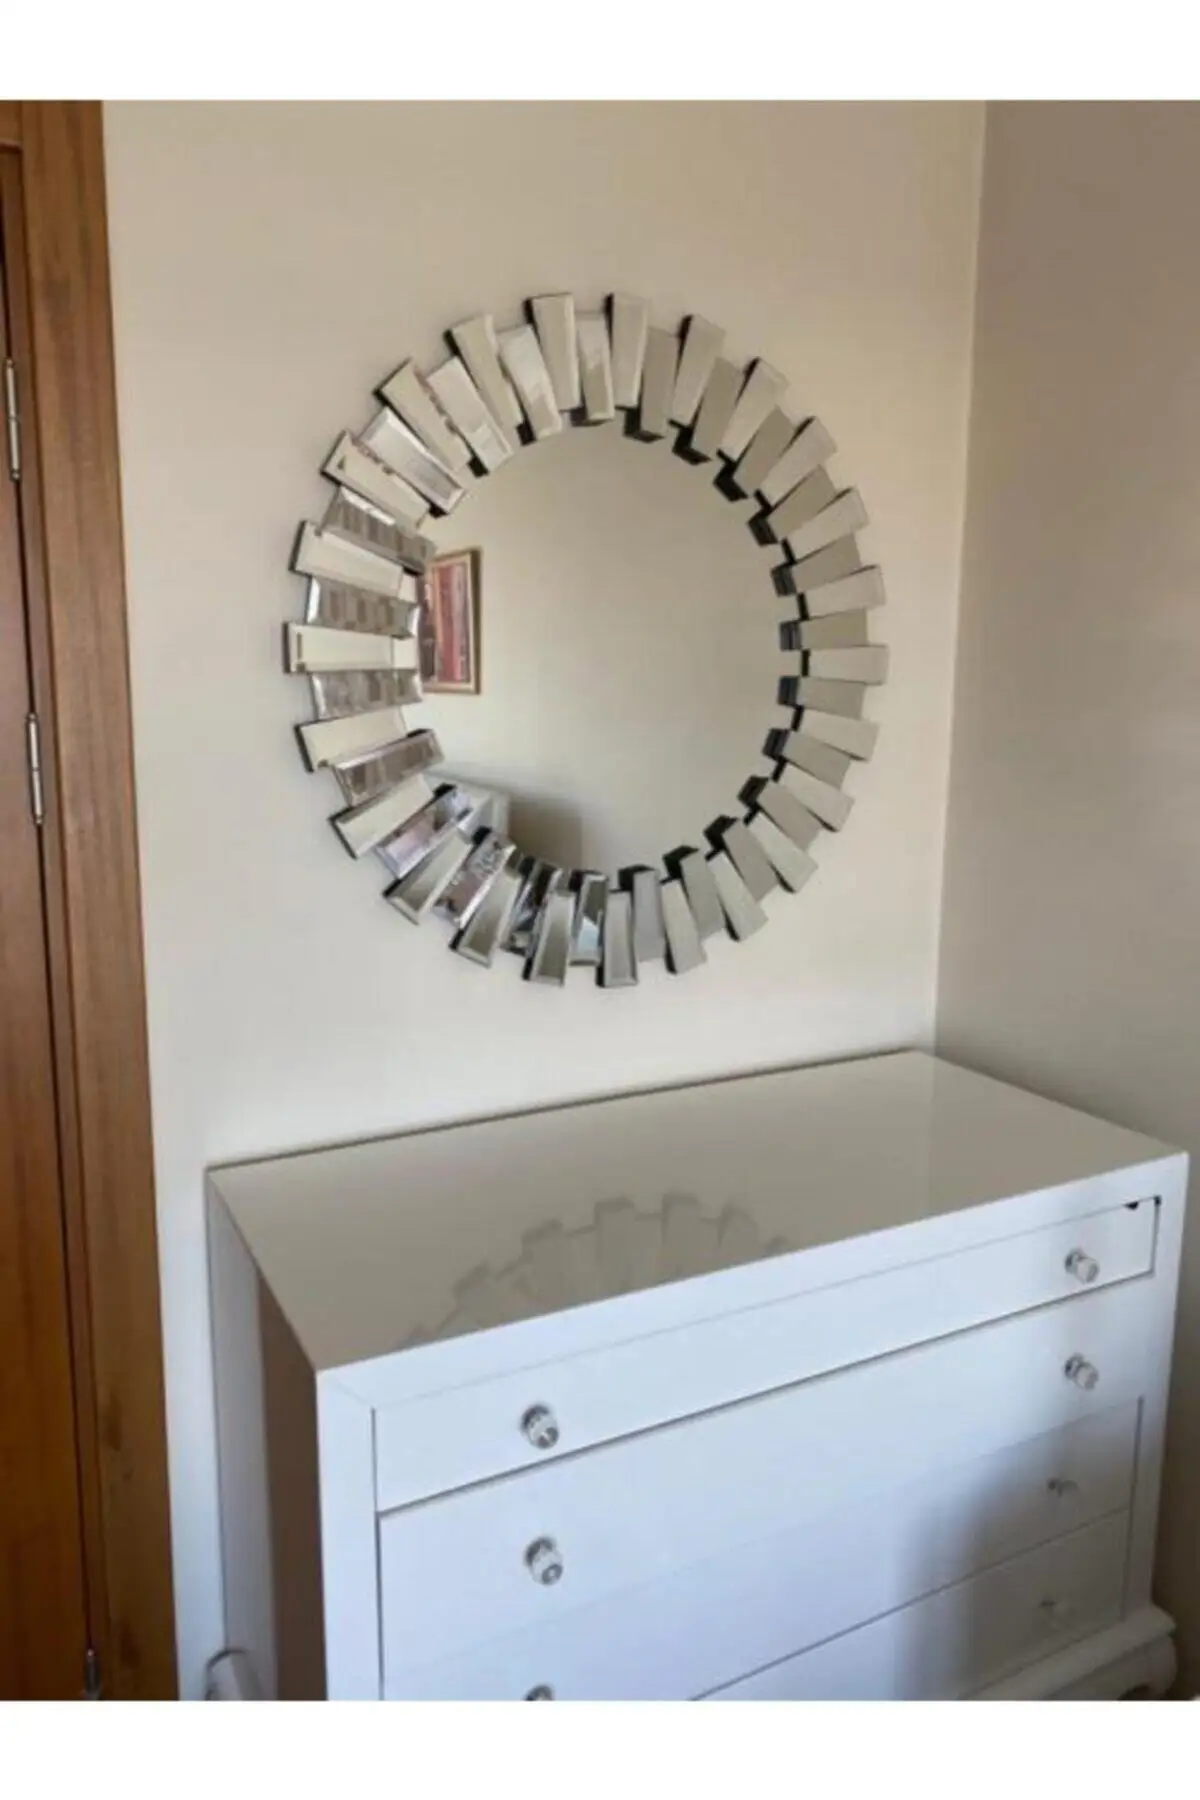 Decorative Wall Mirrors Console 90 cm White Round Furniture Full Body Mirror Large Length Decor Bathroom Made In From Turkey